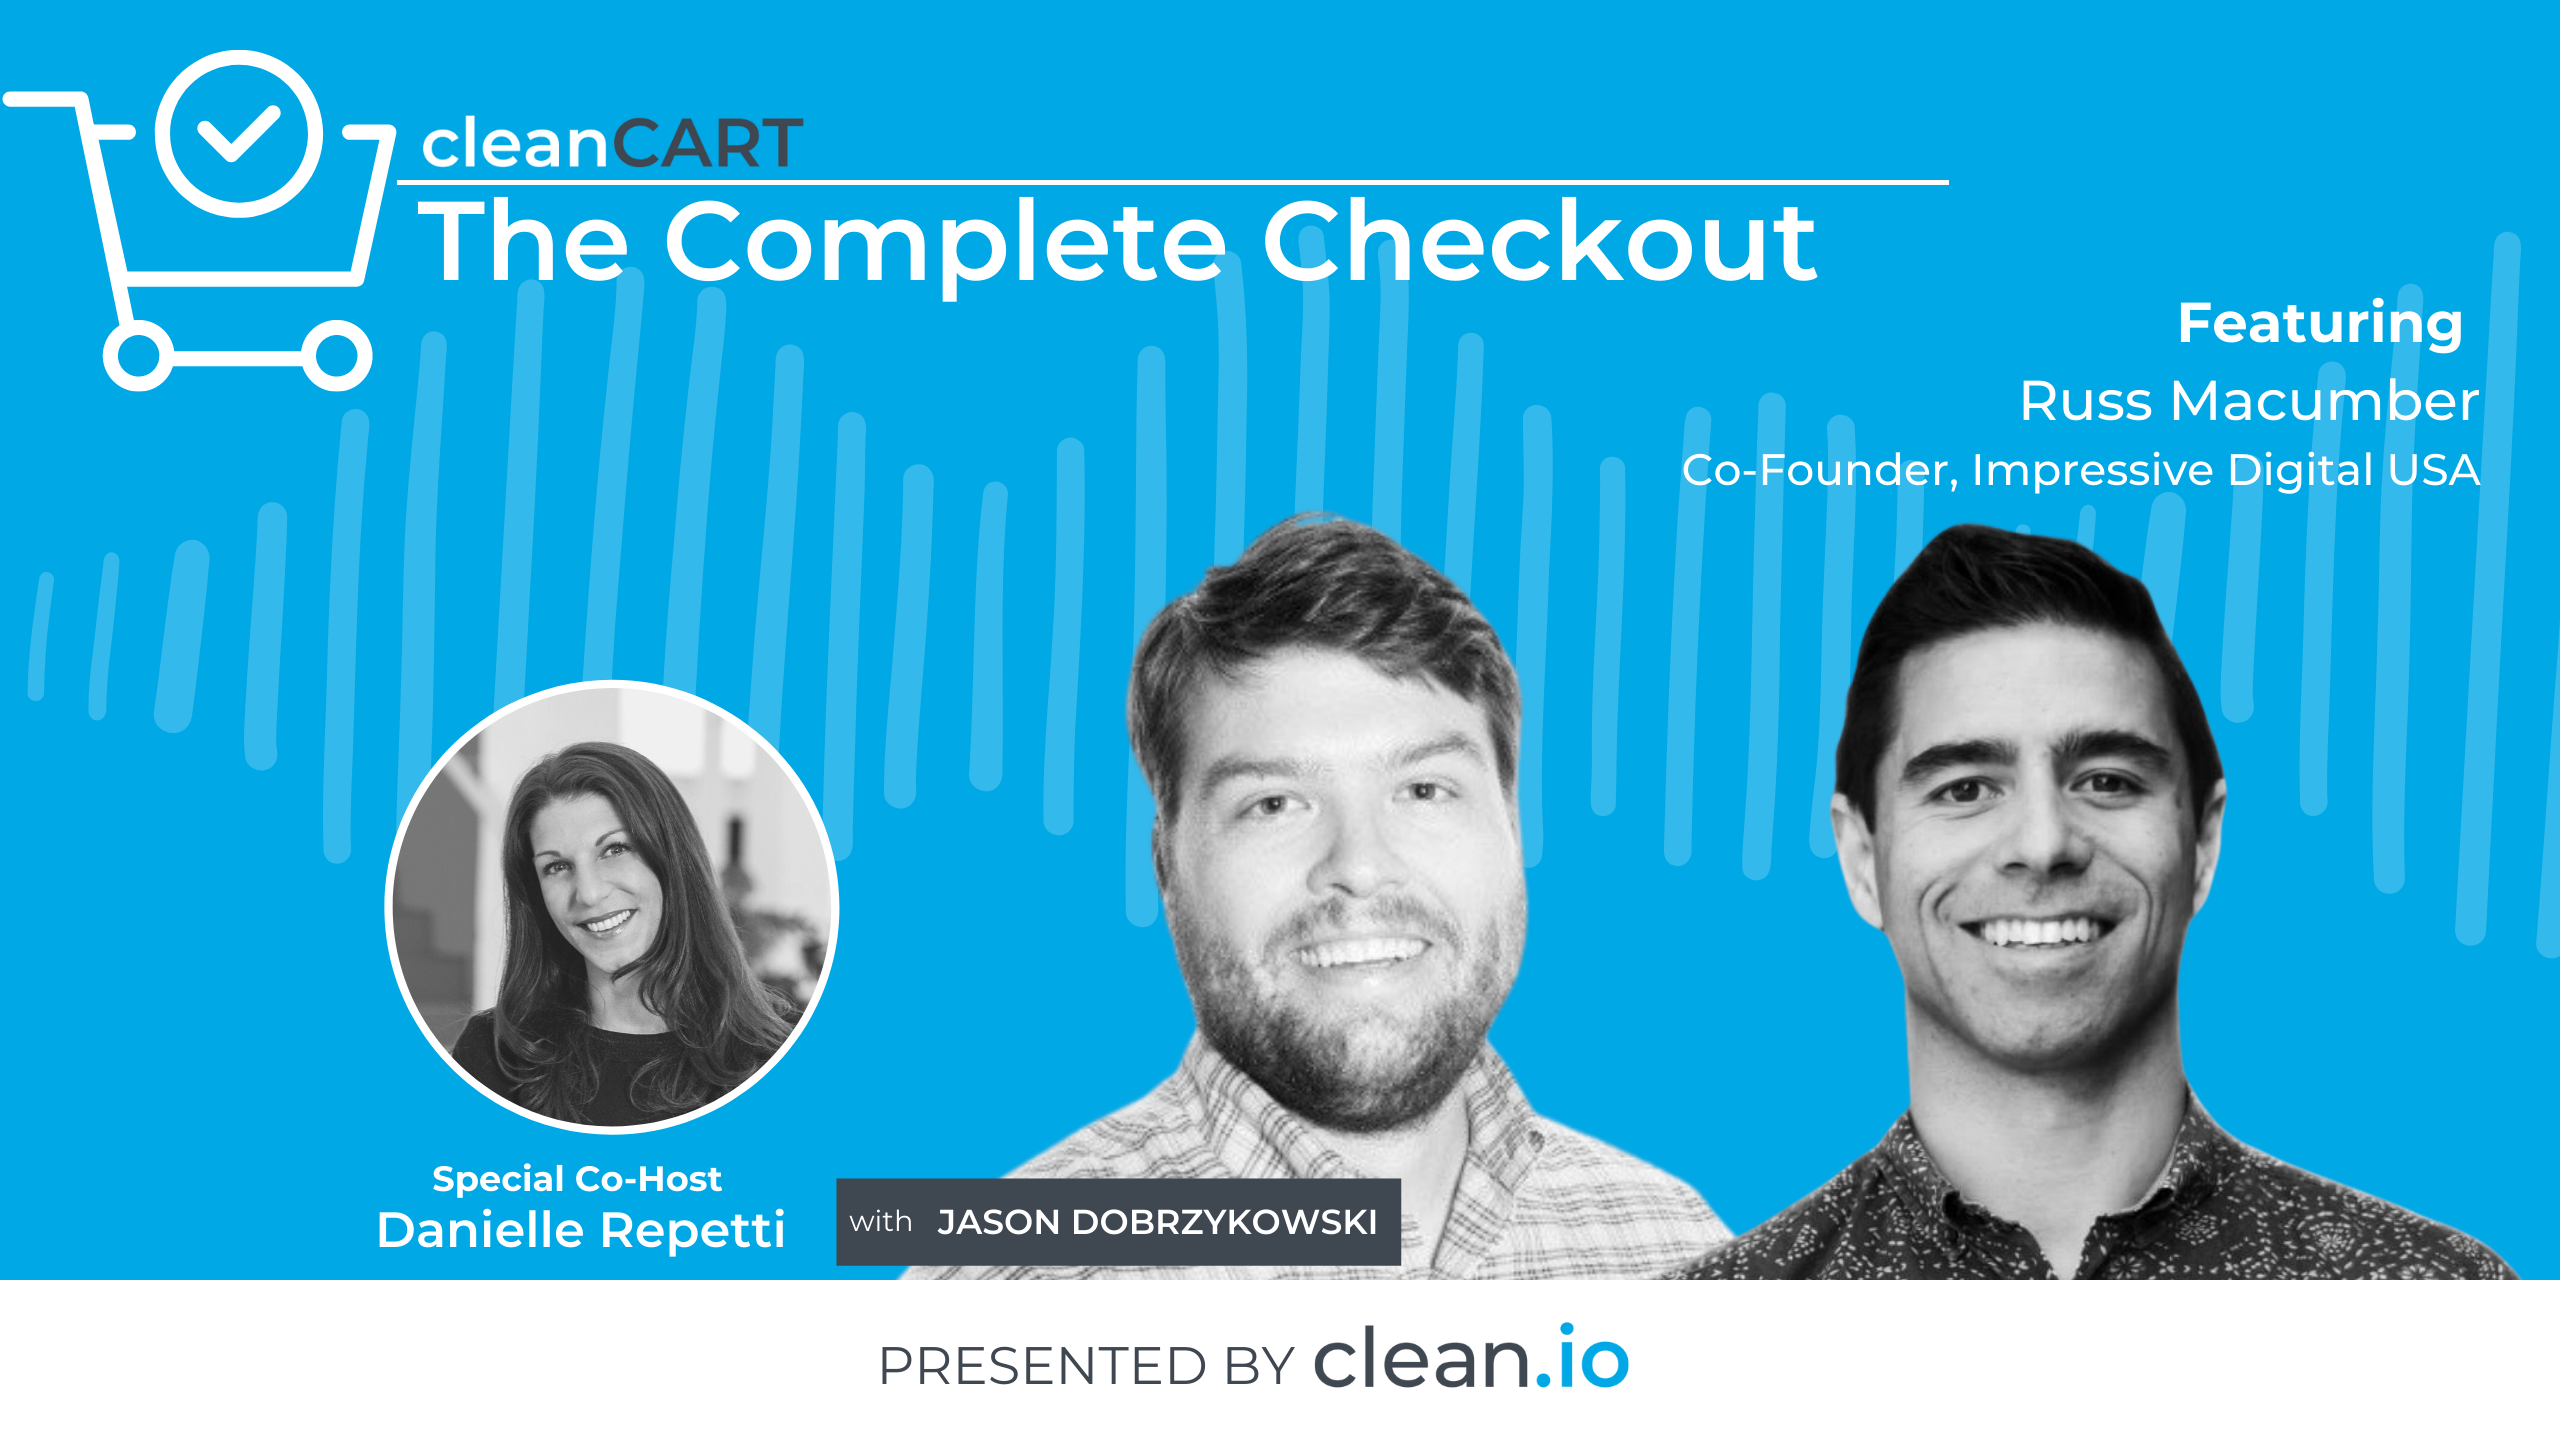 The Complete Checkout: Russ Macumber, Co-Founder at Impressive Digital